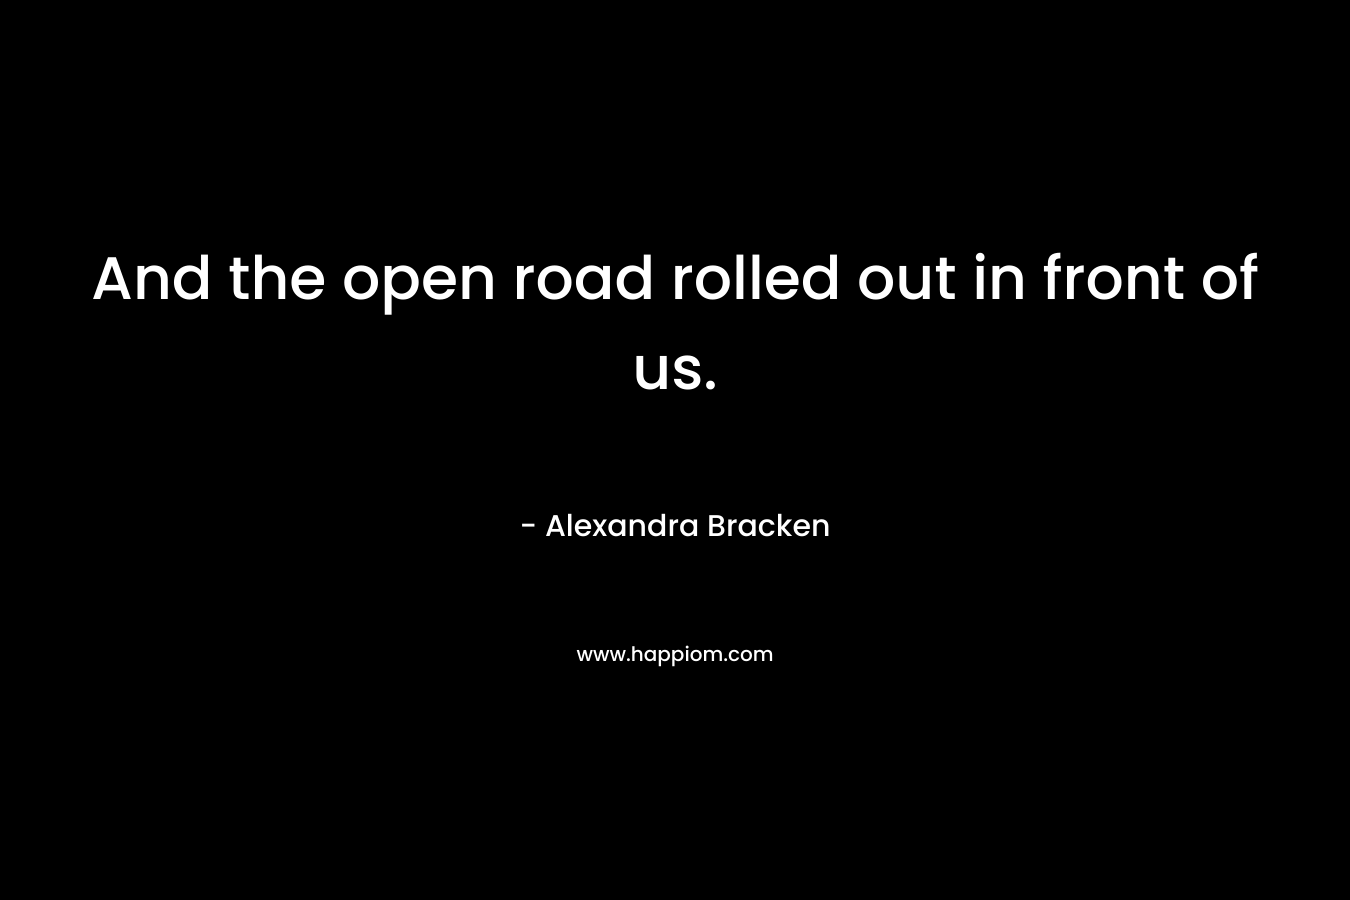 And the open road rolled out in front of us. – Alexandra Bracken